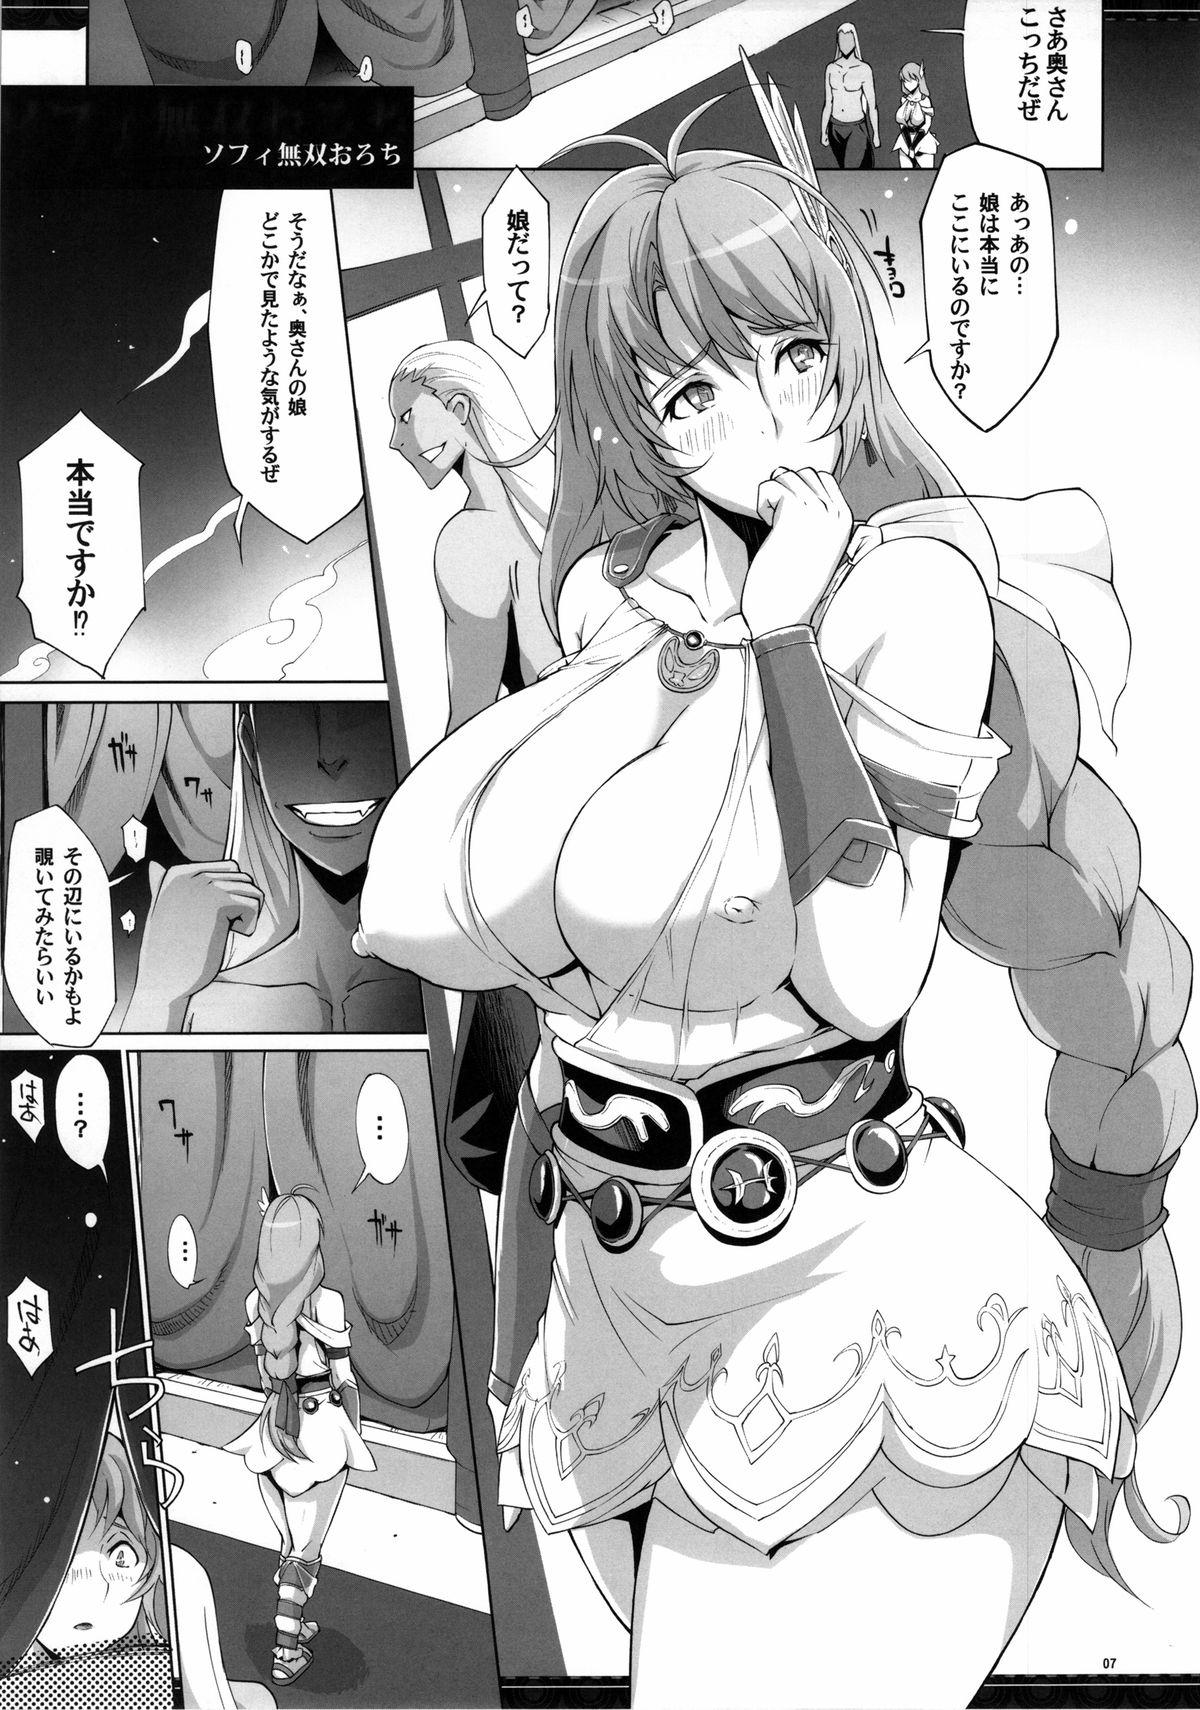 New Sophie Musou Orochi - Warriors orochi Petite Porn - Page 7